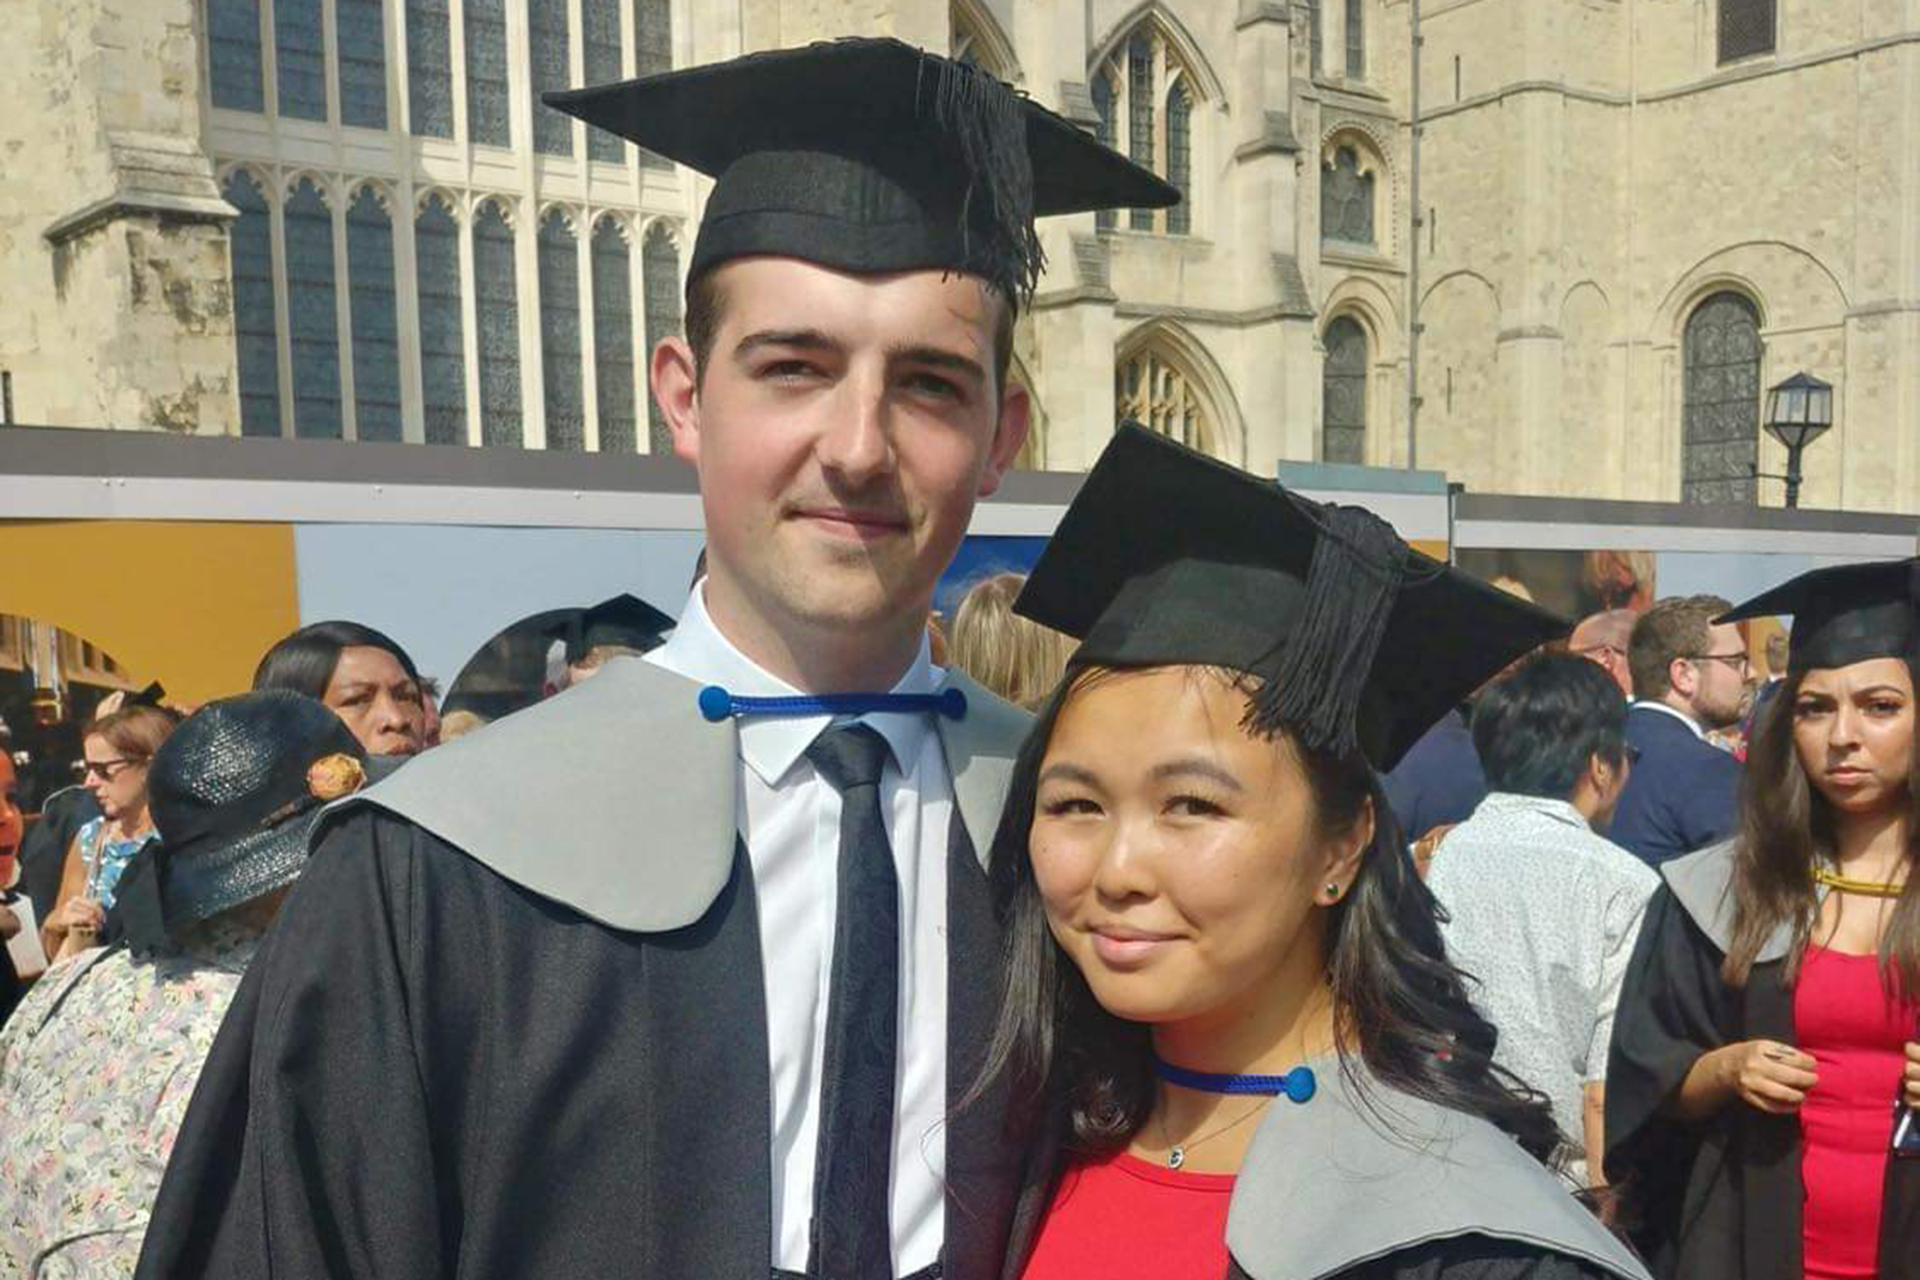 Cameron and Josephine outside Canterbury Cathederal wearing graduation gowns and mortar boards